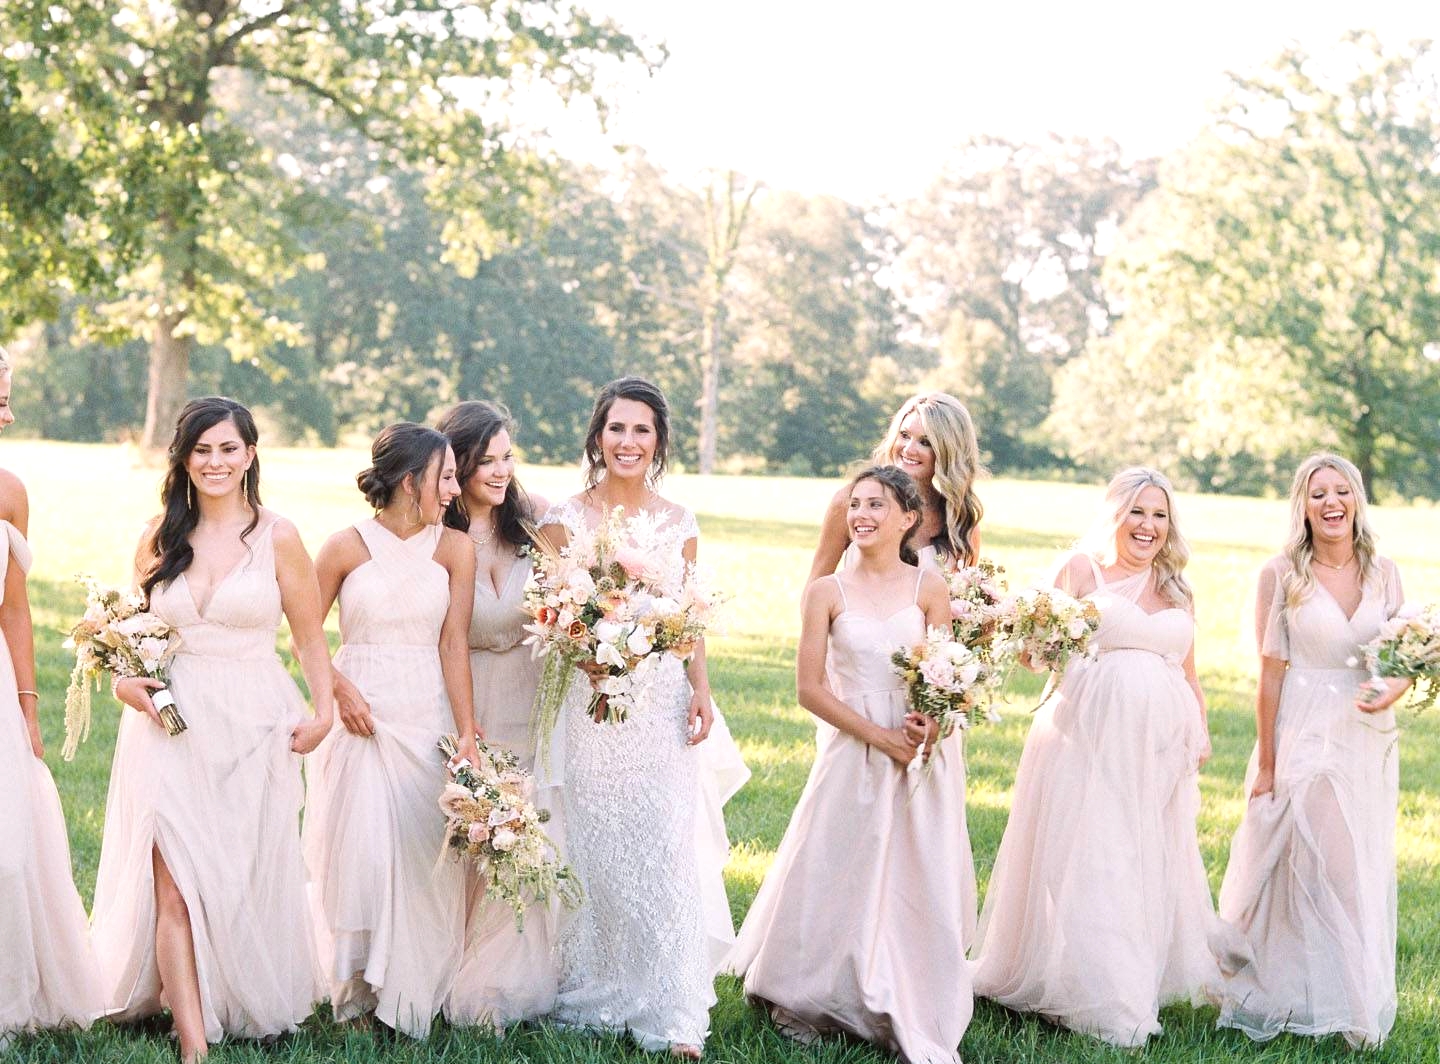 This Bohemian Style Farmhouse Wedding is what Southern dreams are made of!